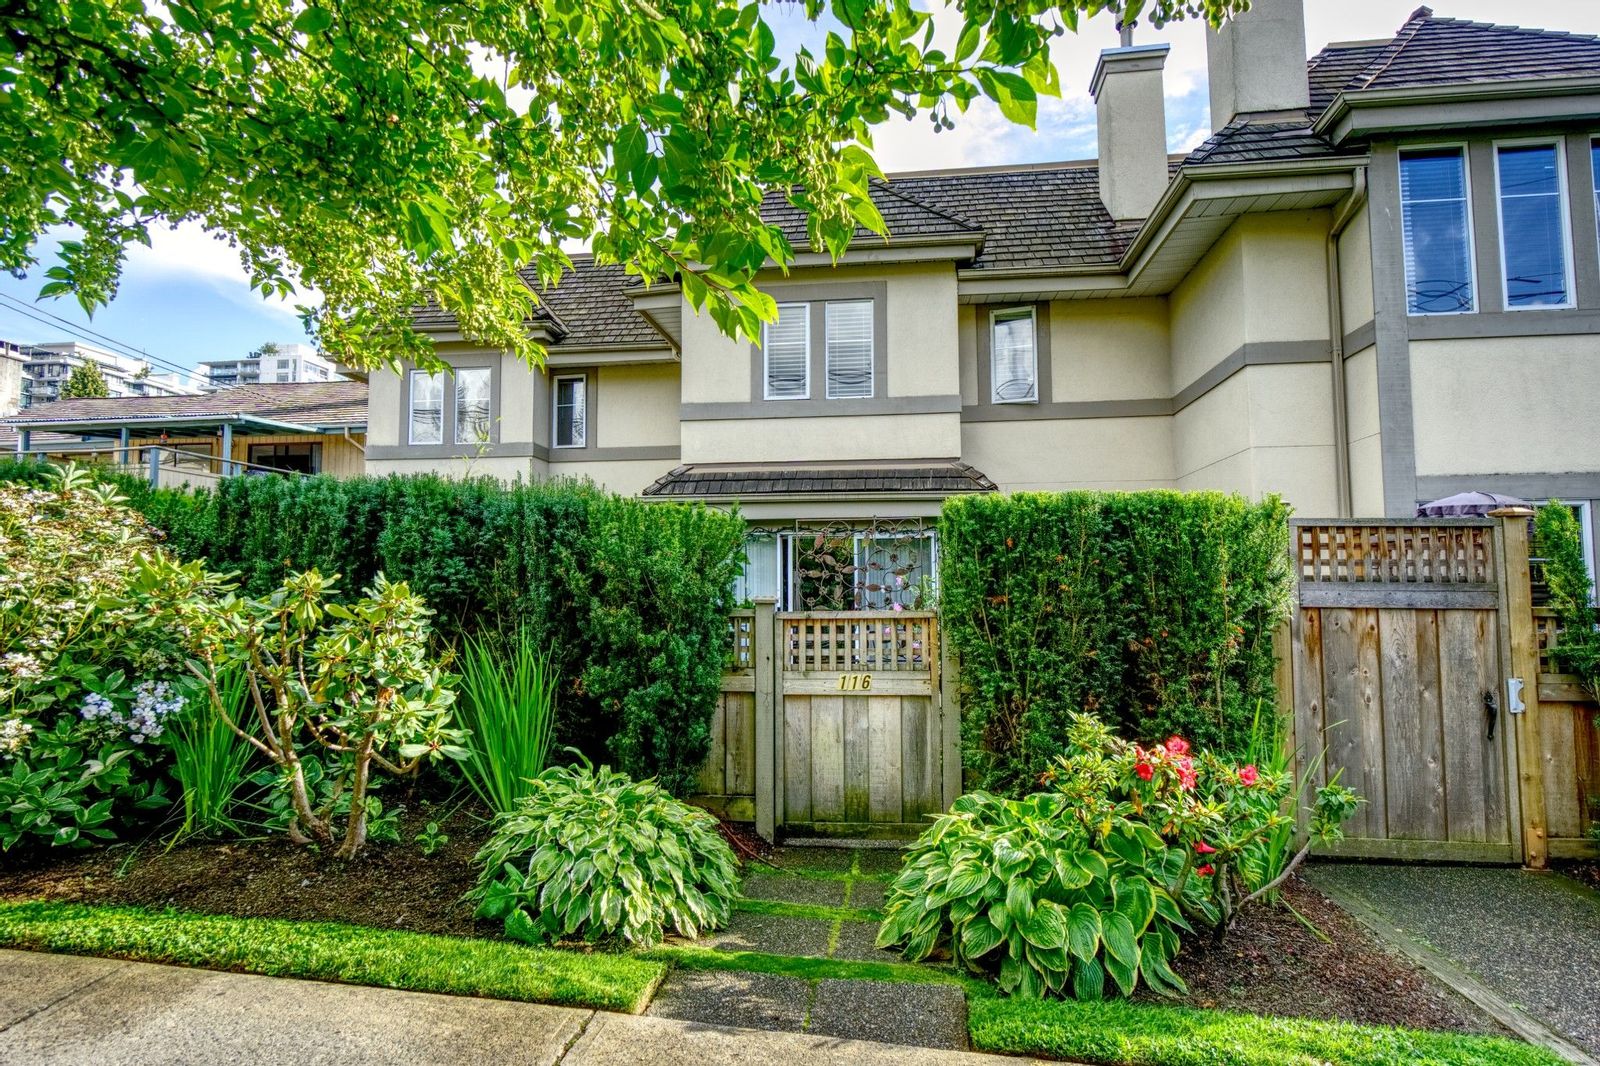 I have sold a property at 116 245 15TH ST W in North Vancouver
